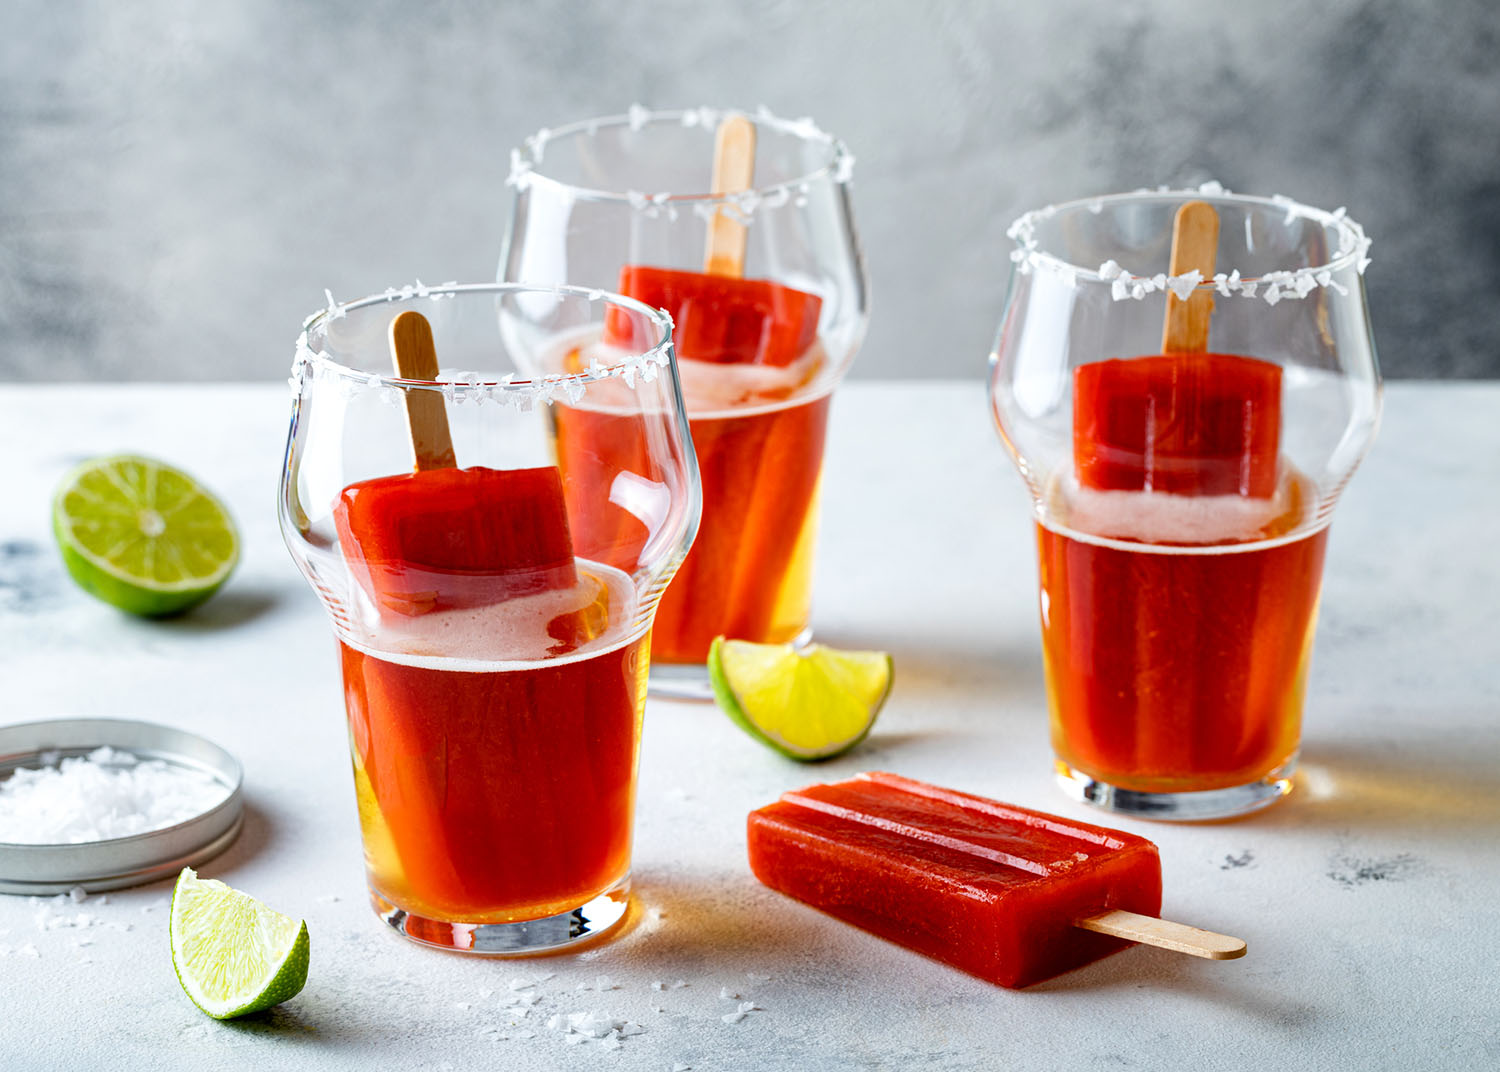 Latin american beer drink Michelada with salt rim and spicy tomato juice popsicles. Summer alcohol cocktail michelada or Mexican bloody beer.